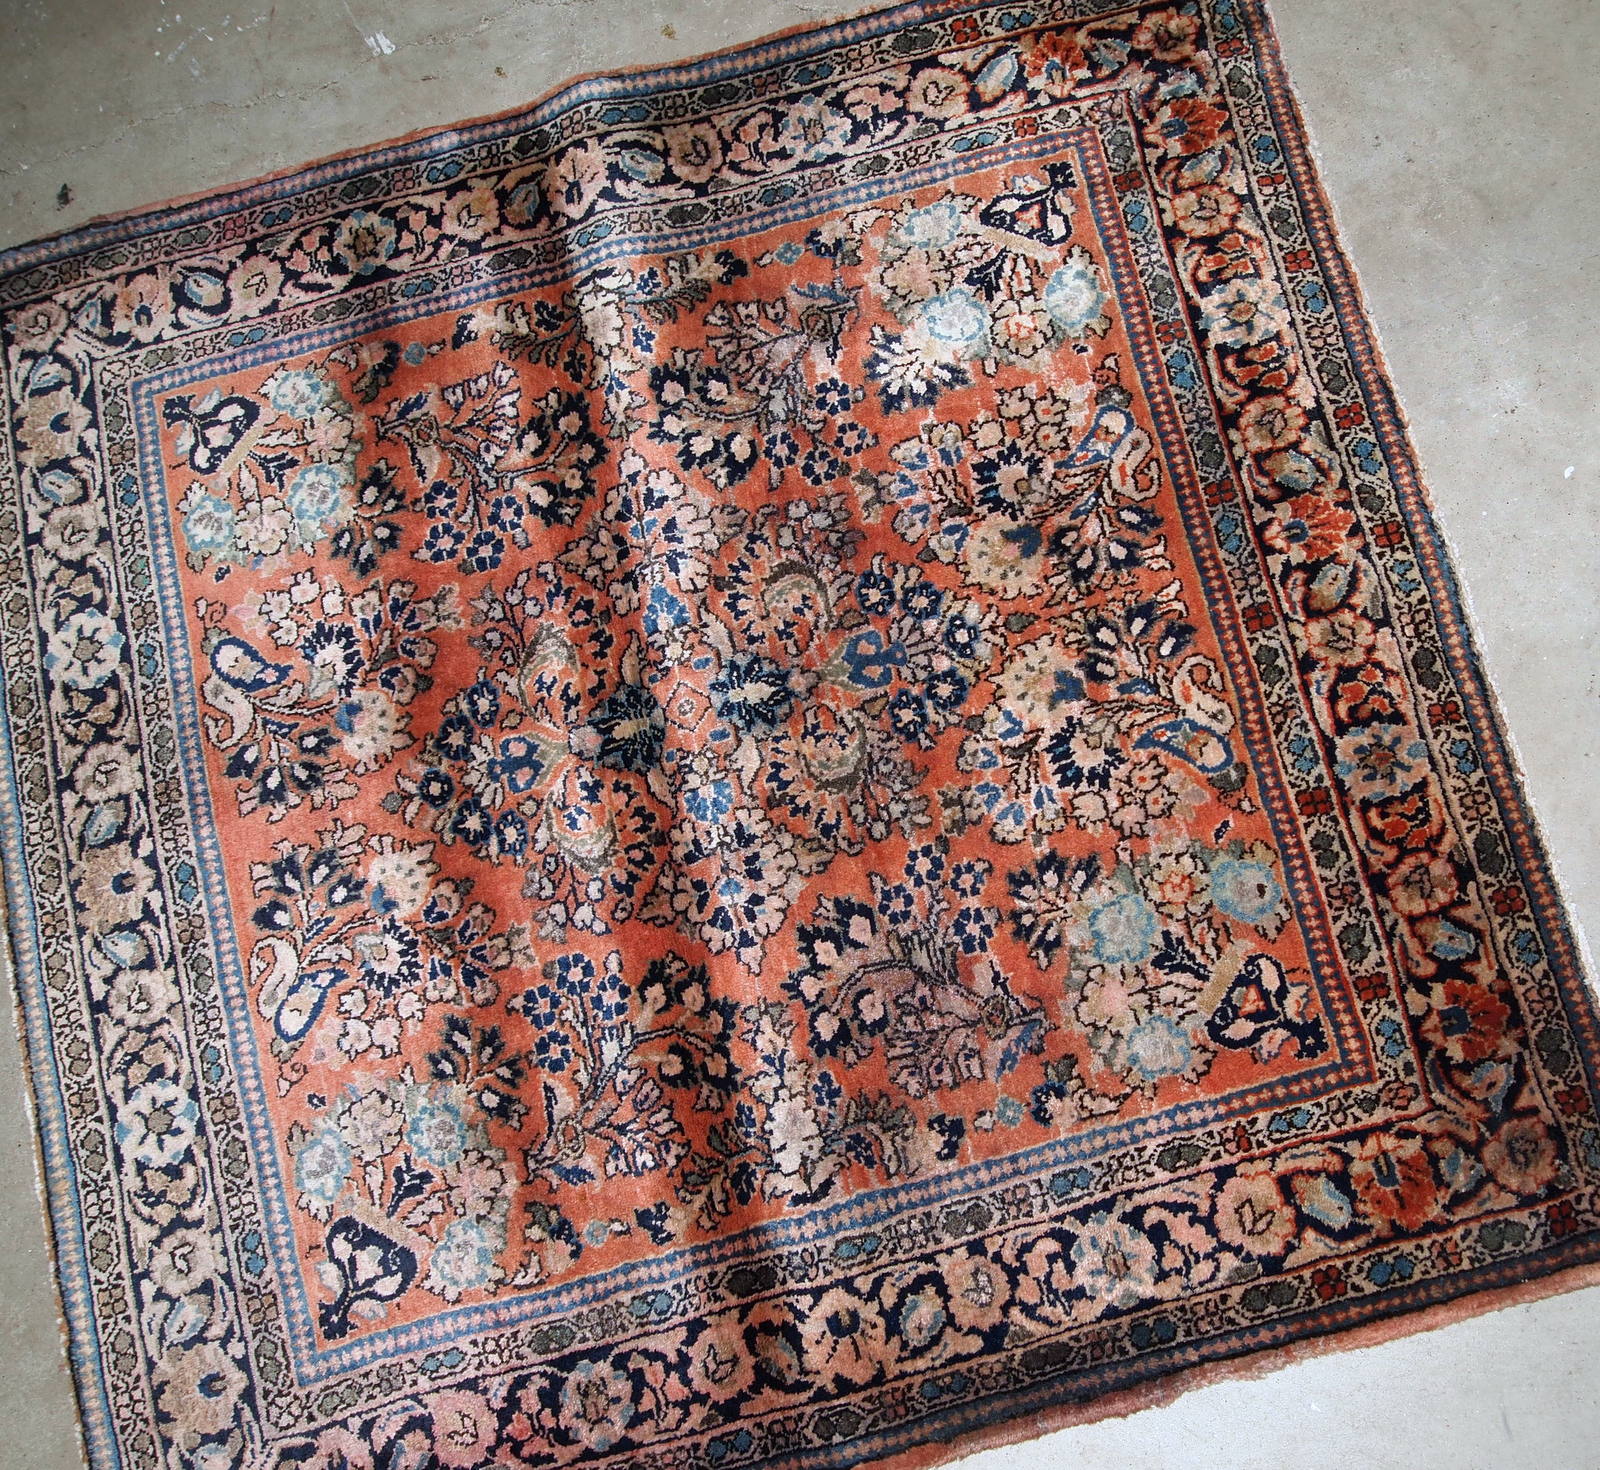 Hand-weaved antique Sarouk square rug from the beginning of 20th century. The rug is in original good condition, made in classic floral design in red and sky blue shades.